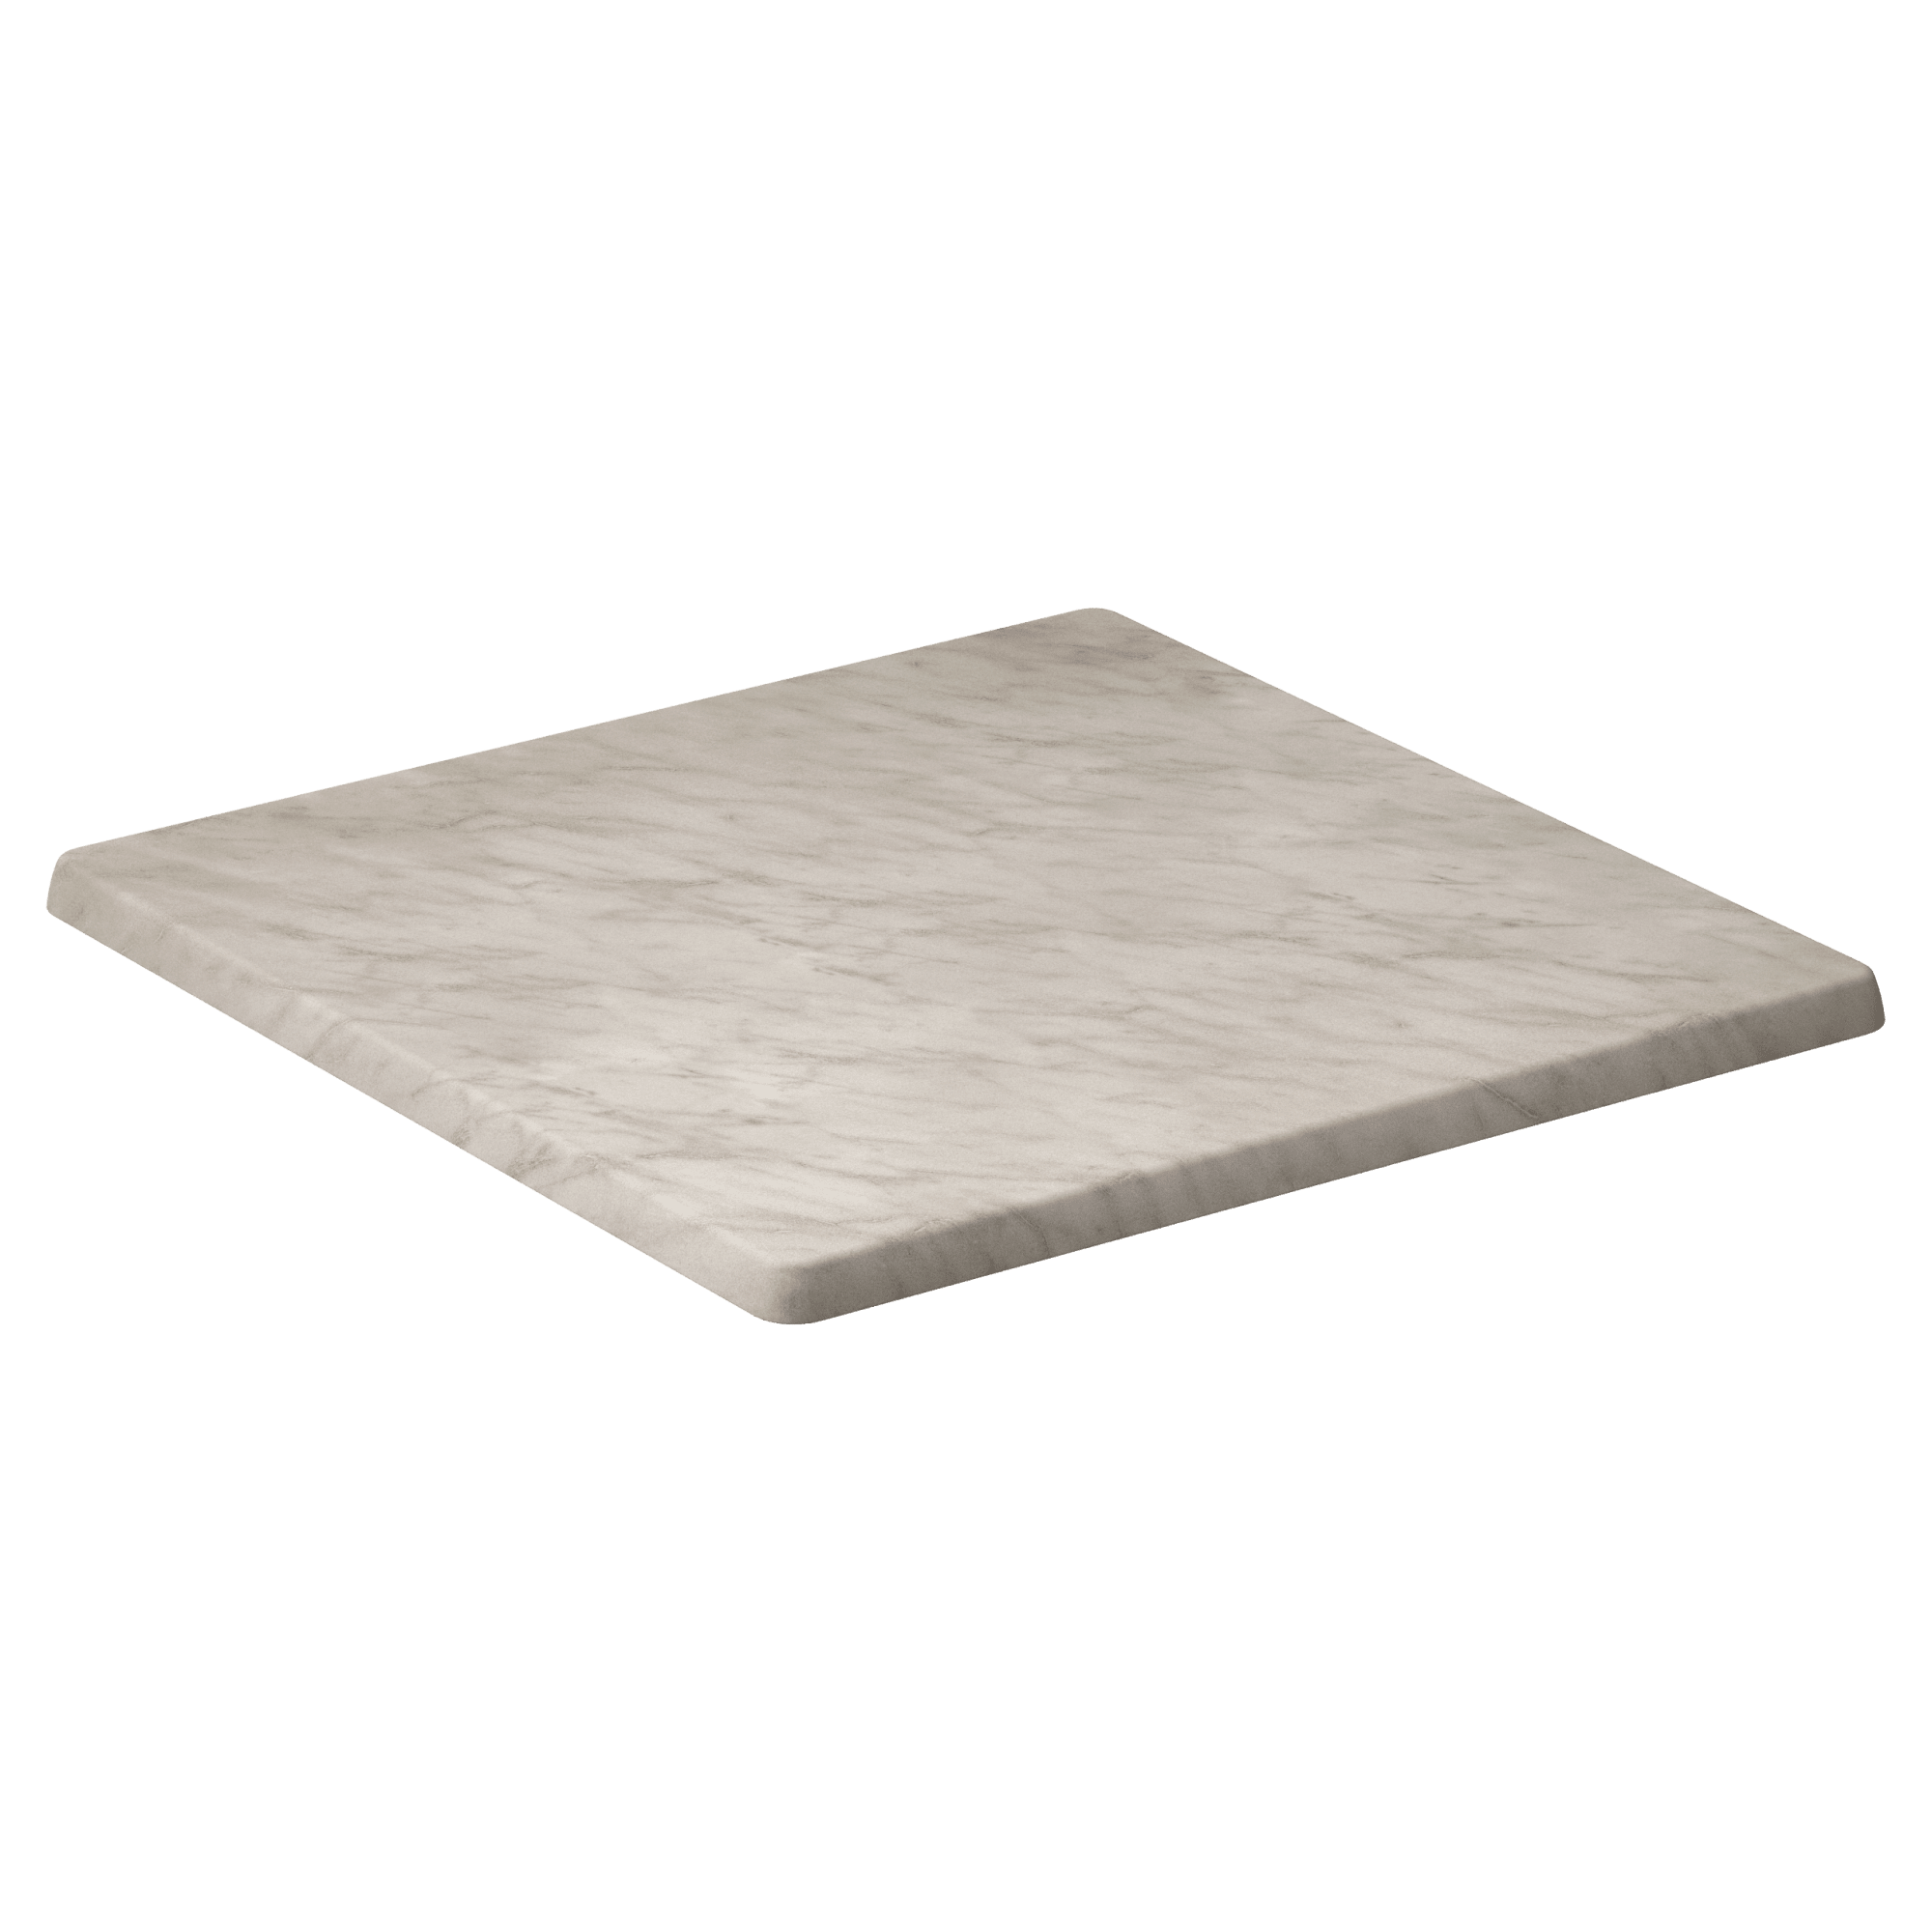 Resin Table Top in Soft Grain Stone Finish with Resin Table Top in Soft Grain Stone Finish